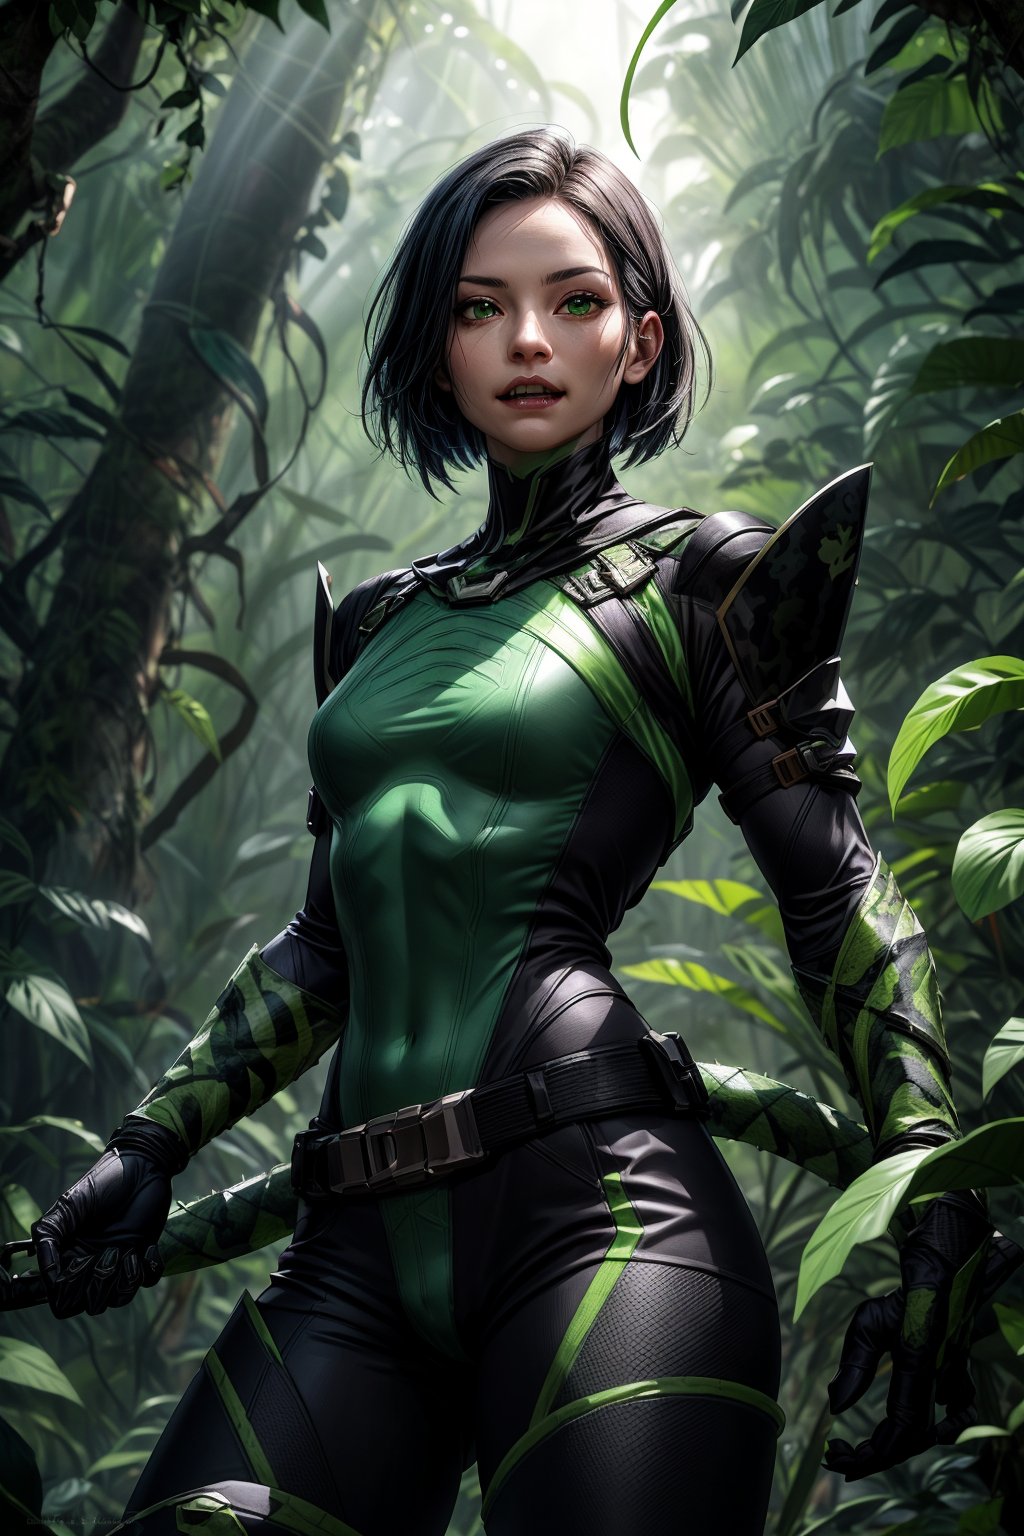 a medium shot of a jungle predator-themed Viper skin with camouflage armor made of leaves and vines, a tribal mask adorned with fangs and claws, and green bioluminescent markings, with her abilities reflecting nature's toxins, set in a dense, misty jungle teeming with exotic flora and fauna, valorant viper